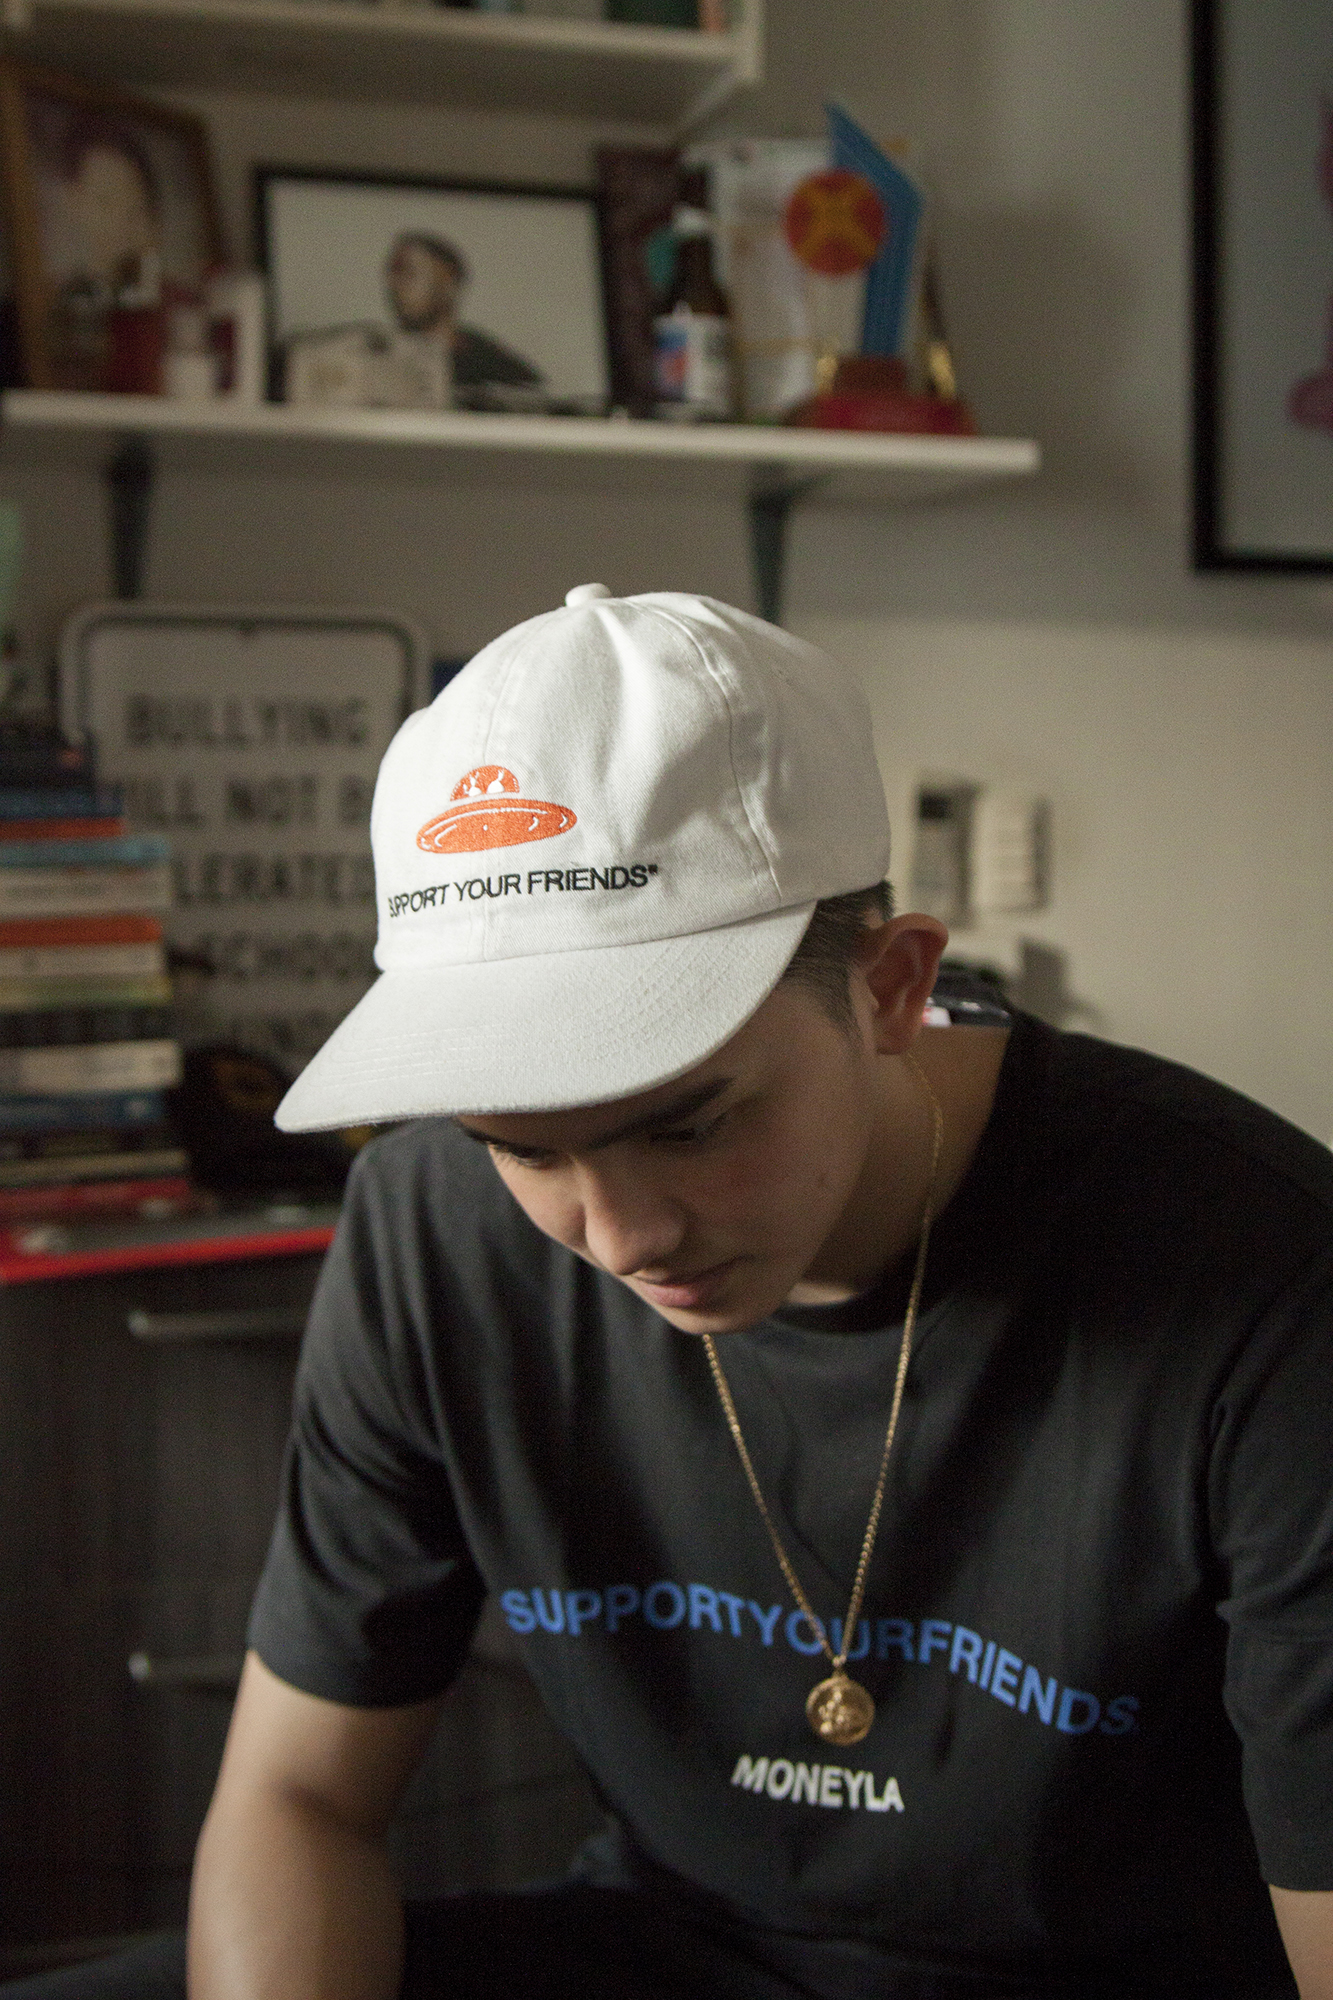 Randell wearing the OG Support Your Friends cap. PHOTO © JED GREGORIO